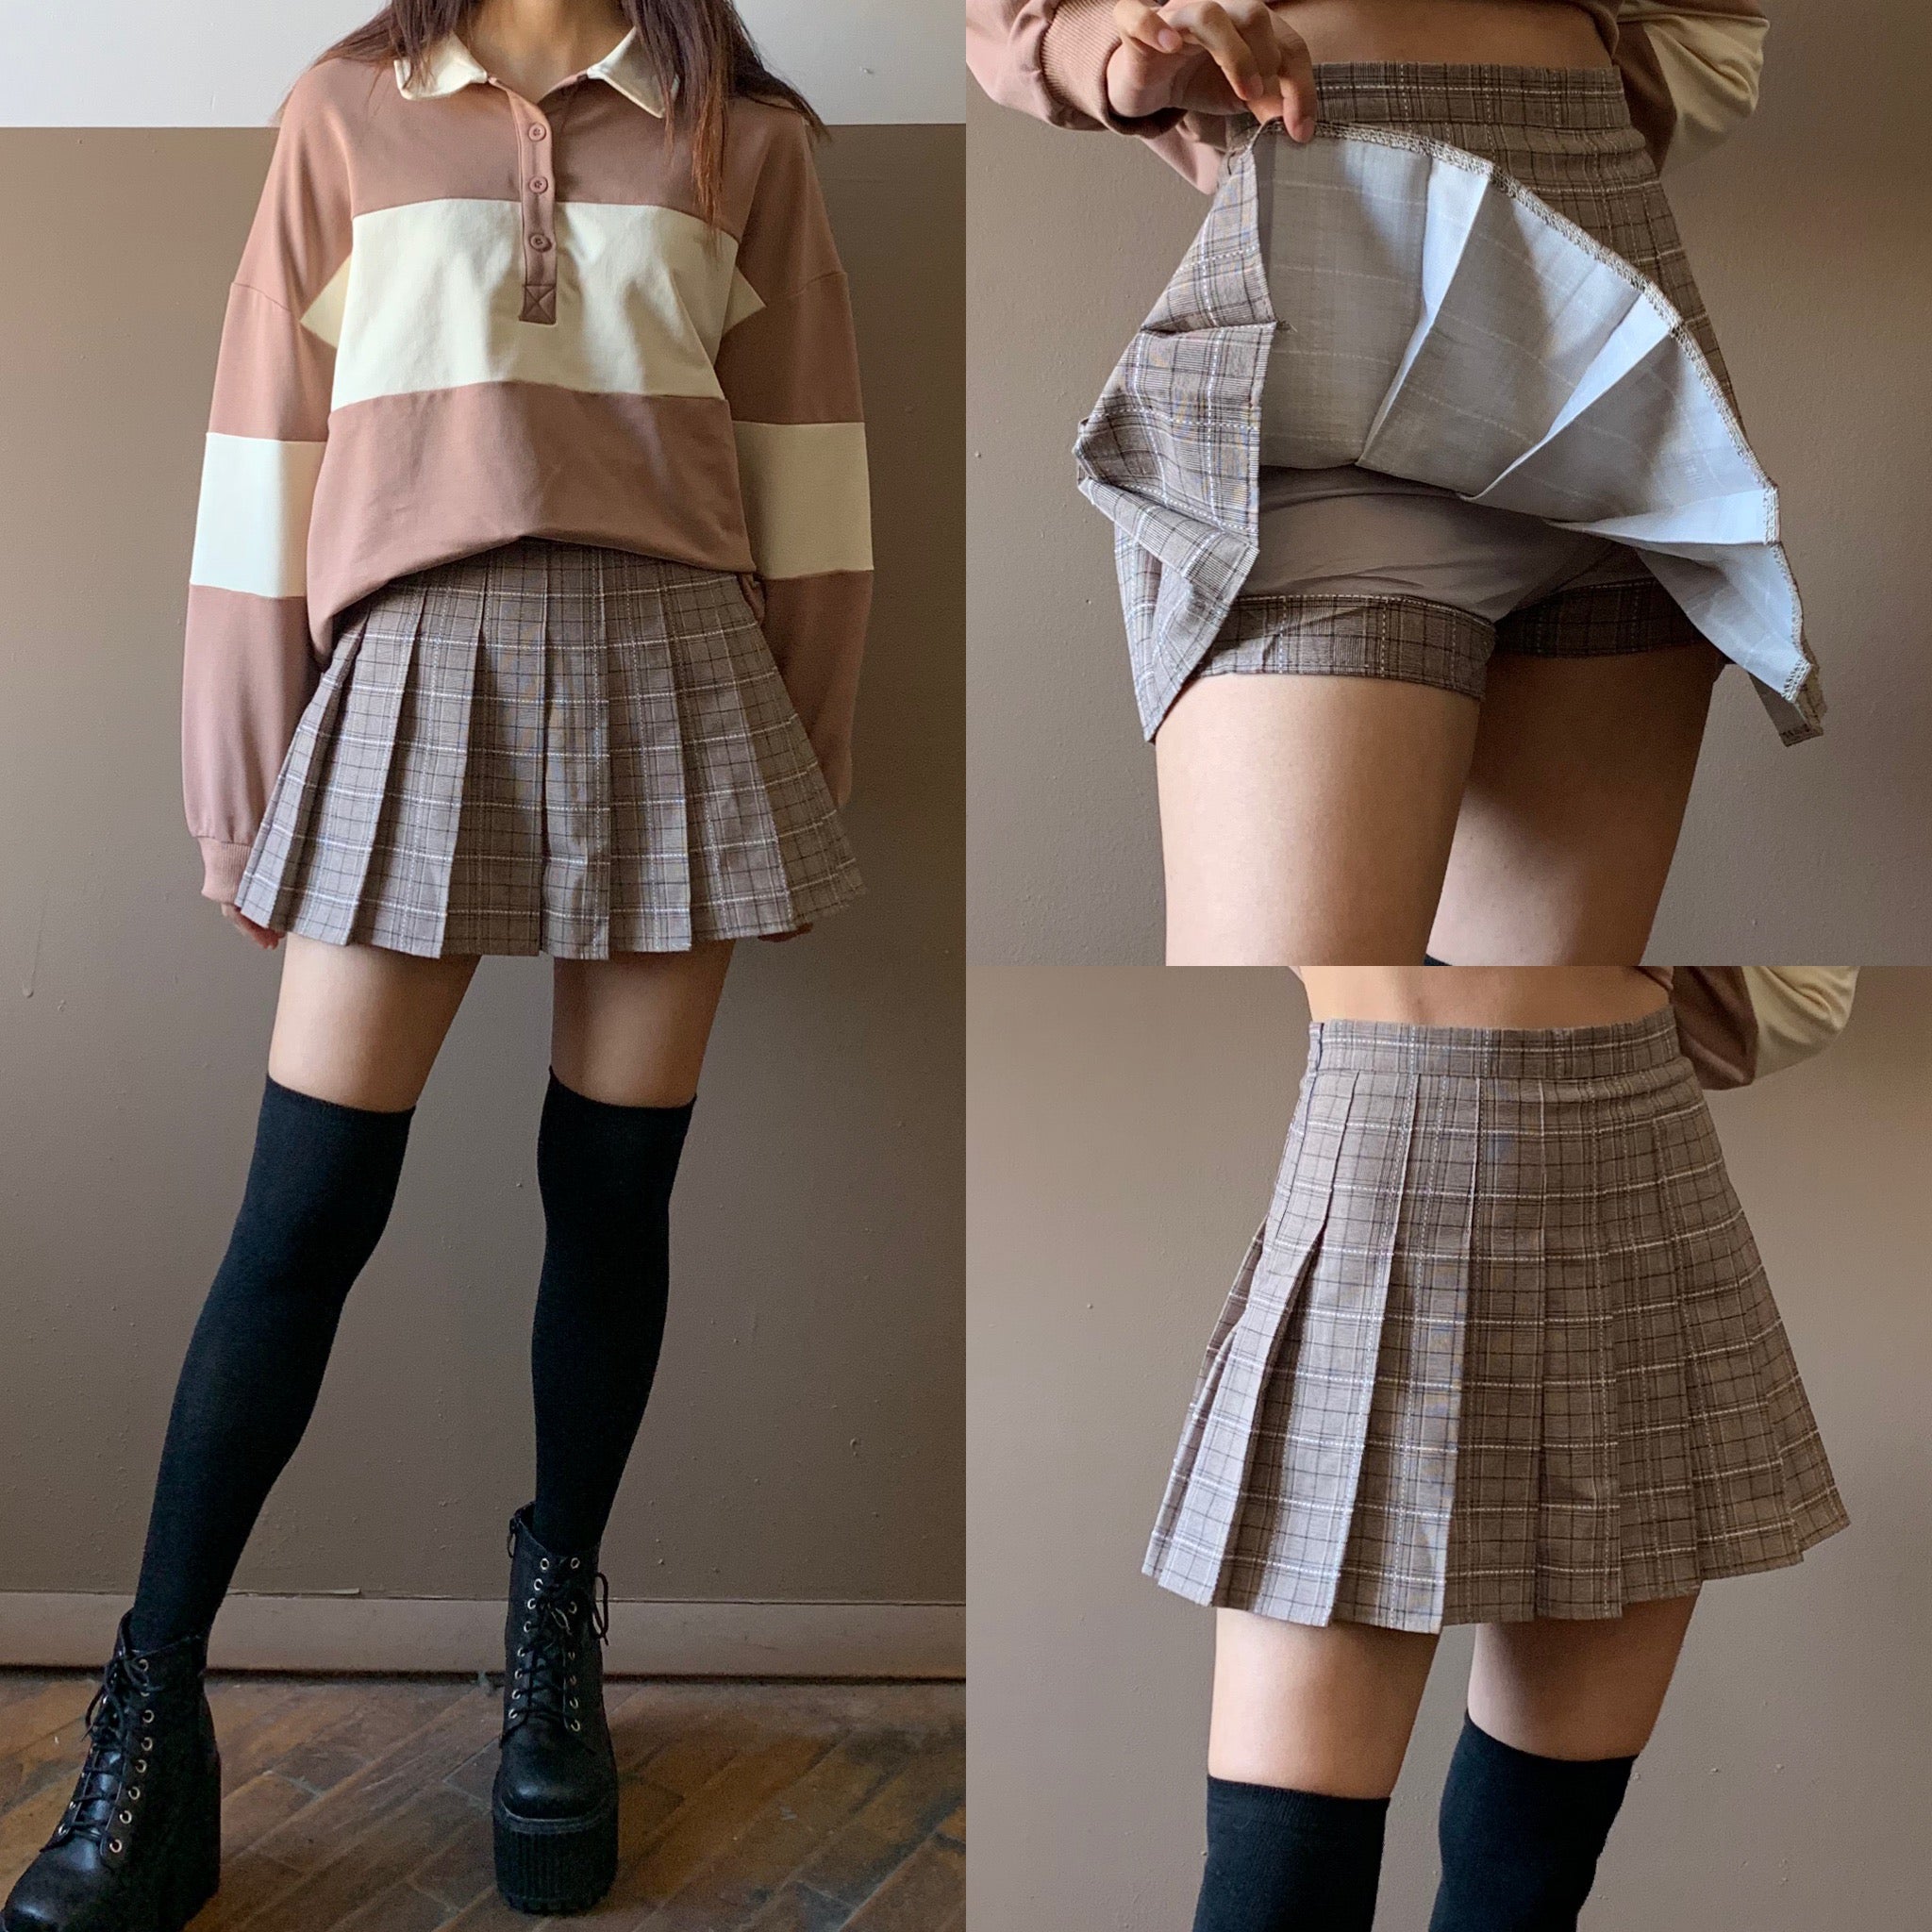 aesthetic skirt plaid pleated outfits outfit kawaii preppy grunge skirts kokopiecoco uniforme scolaire filles earthy soft chicas ropa tenues mode